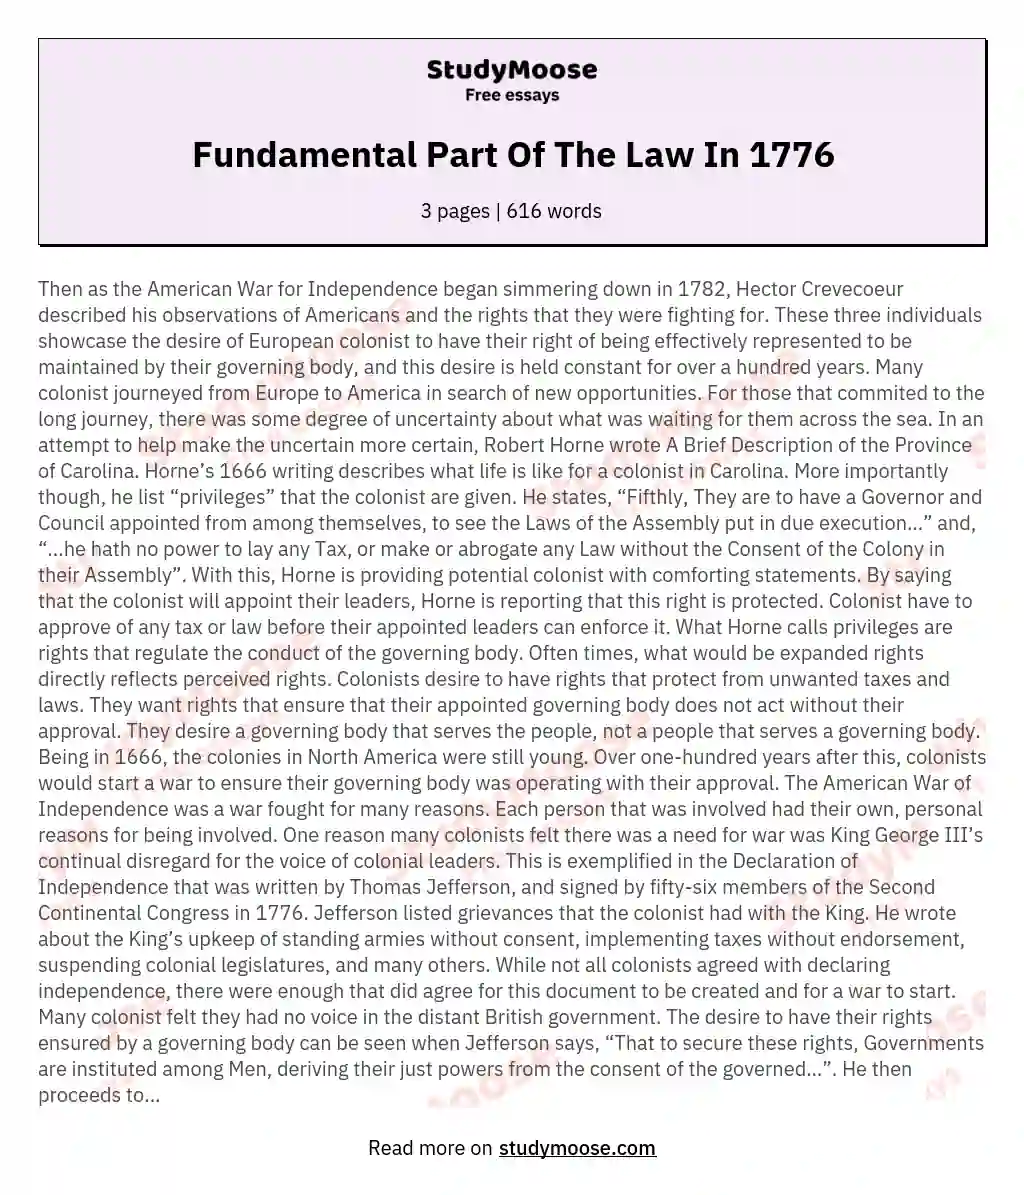 Fundamental Part Of The Law In 1776 essay